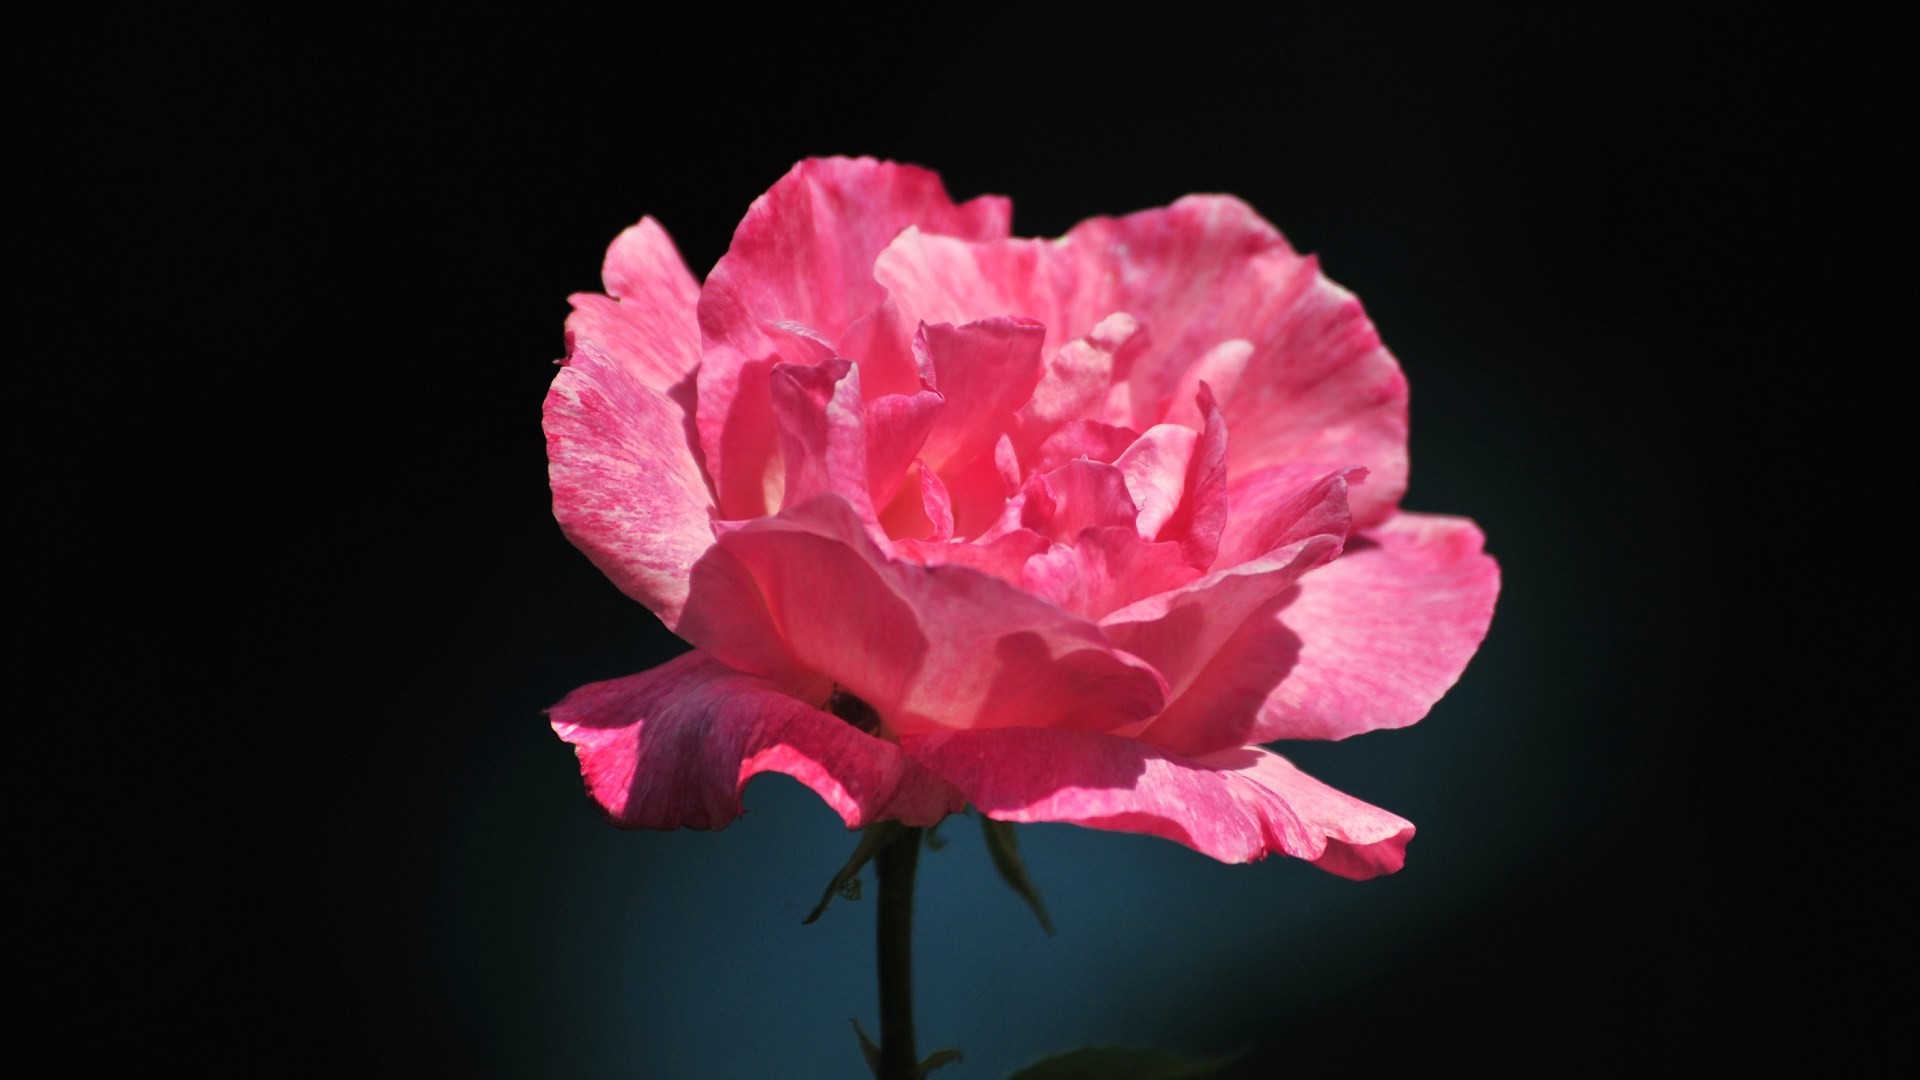 Pink Rose Flower Wallpaper 62 Pictures